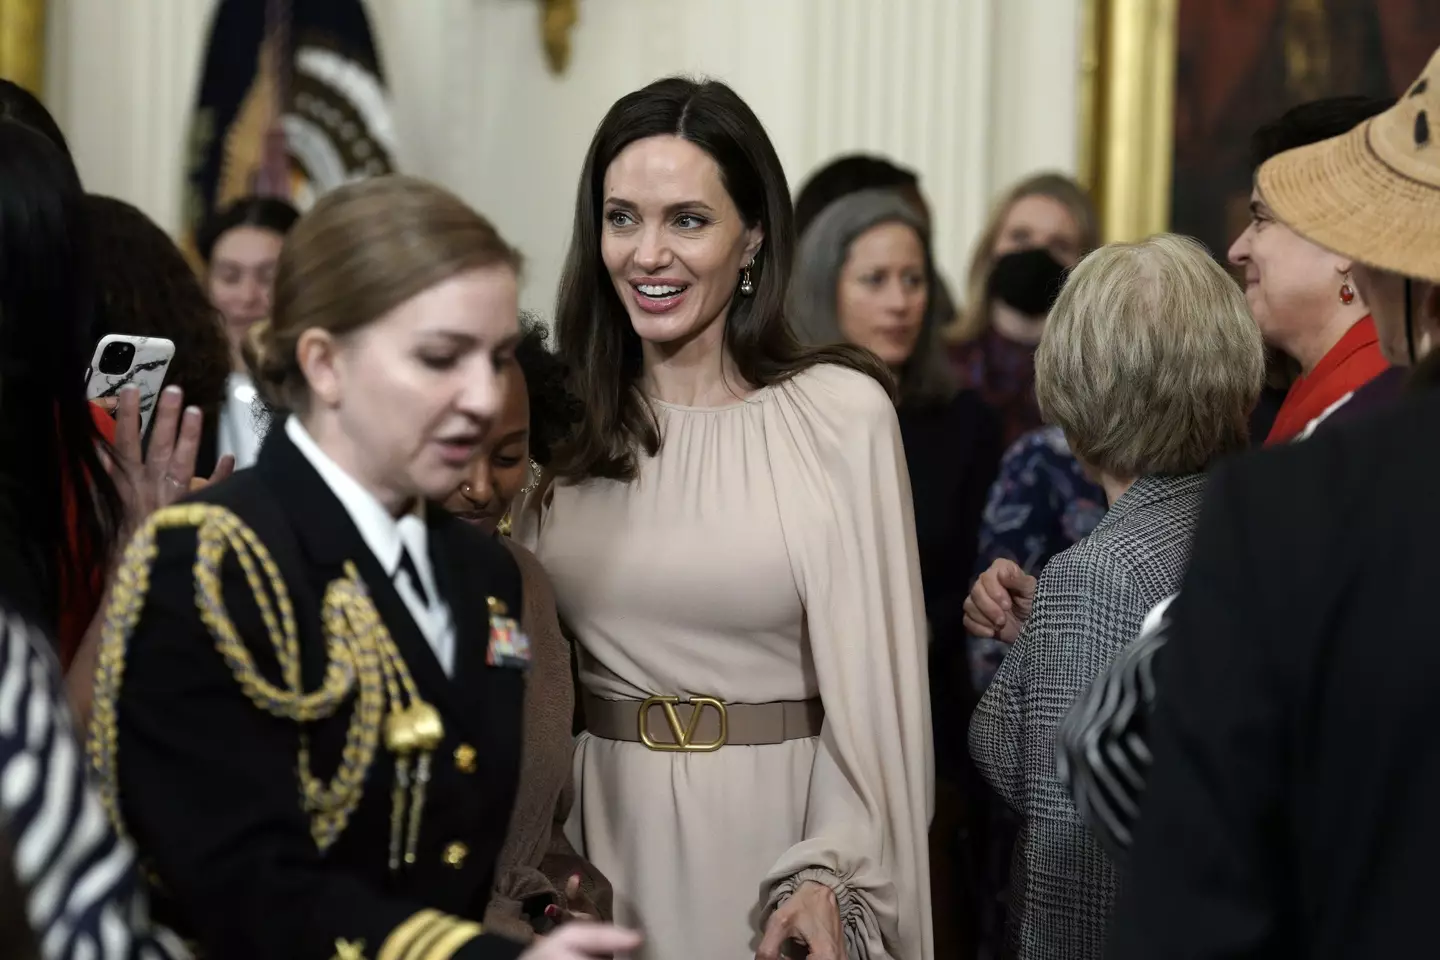 Angelina Jolie attending an event at the White House.